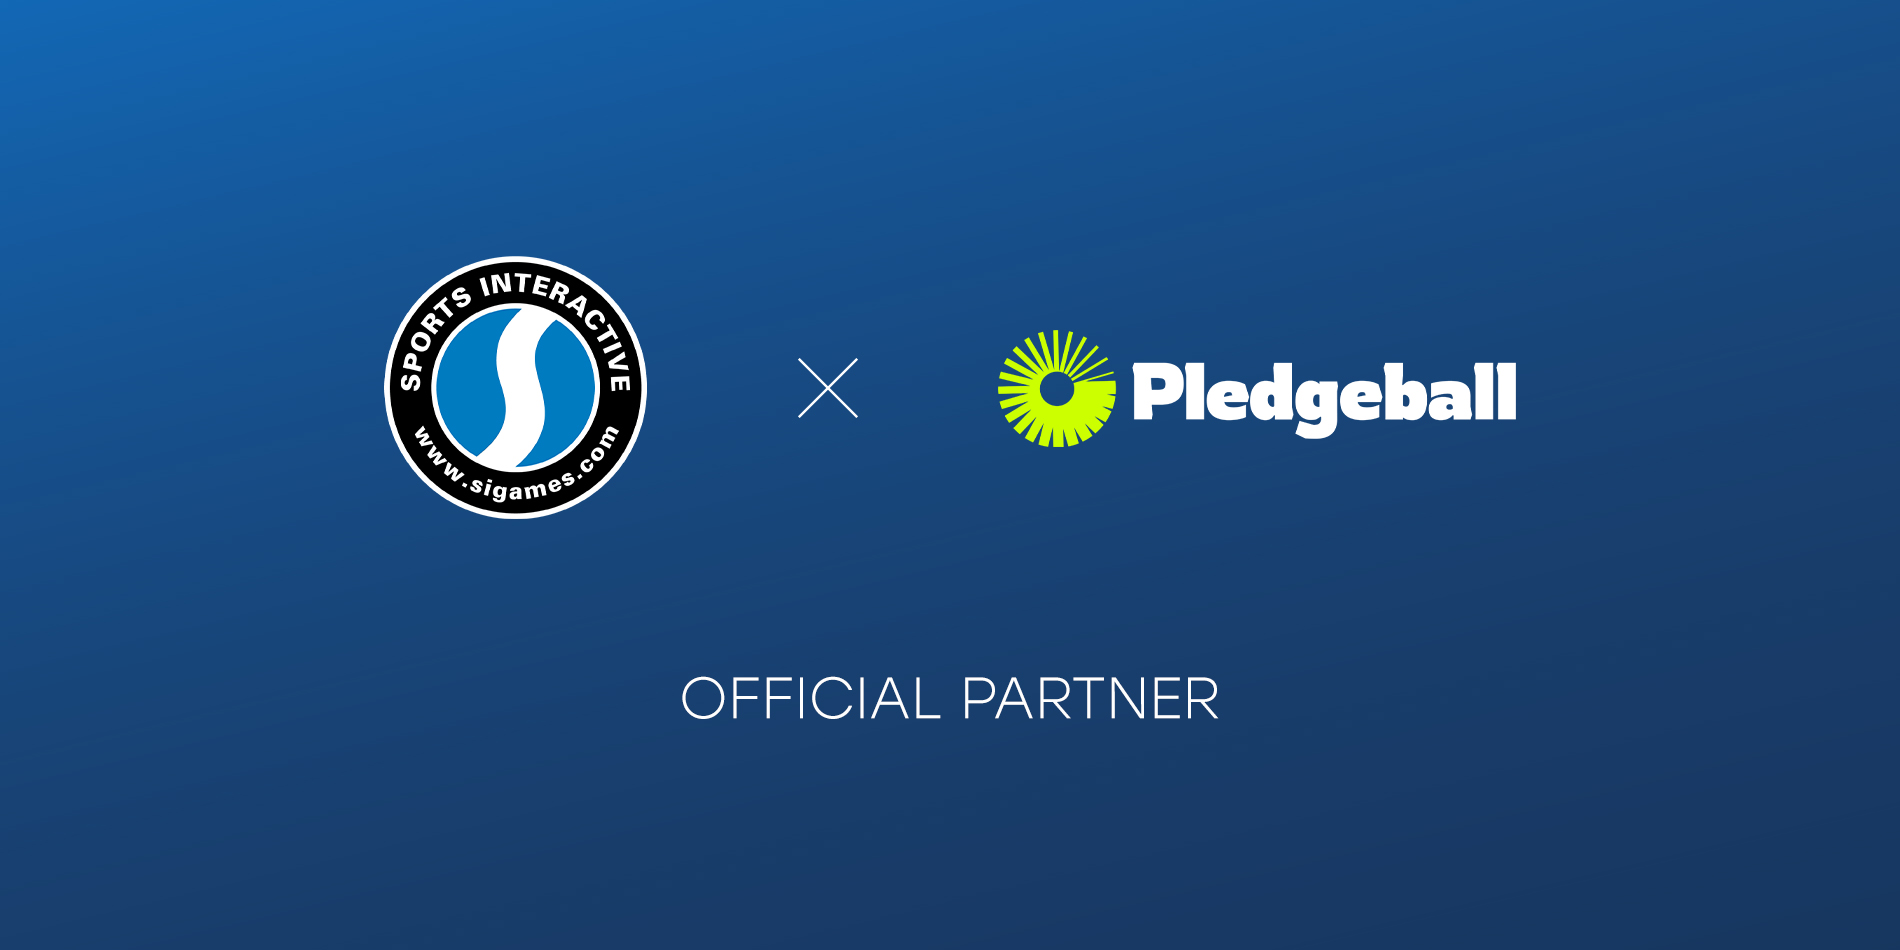 Win Big With Football Manager and Pledgeball